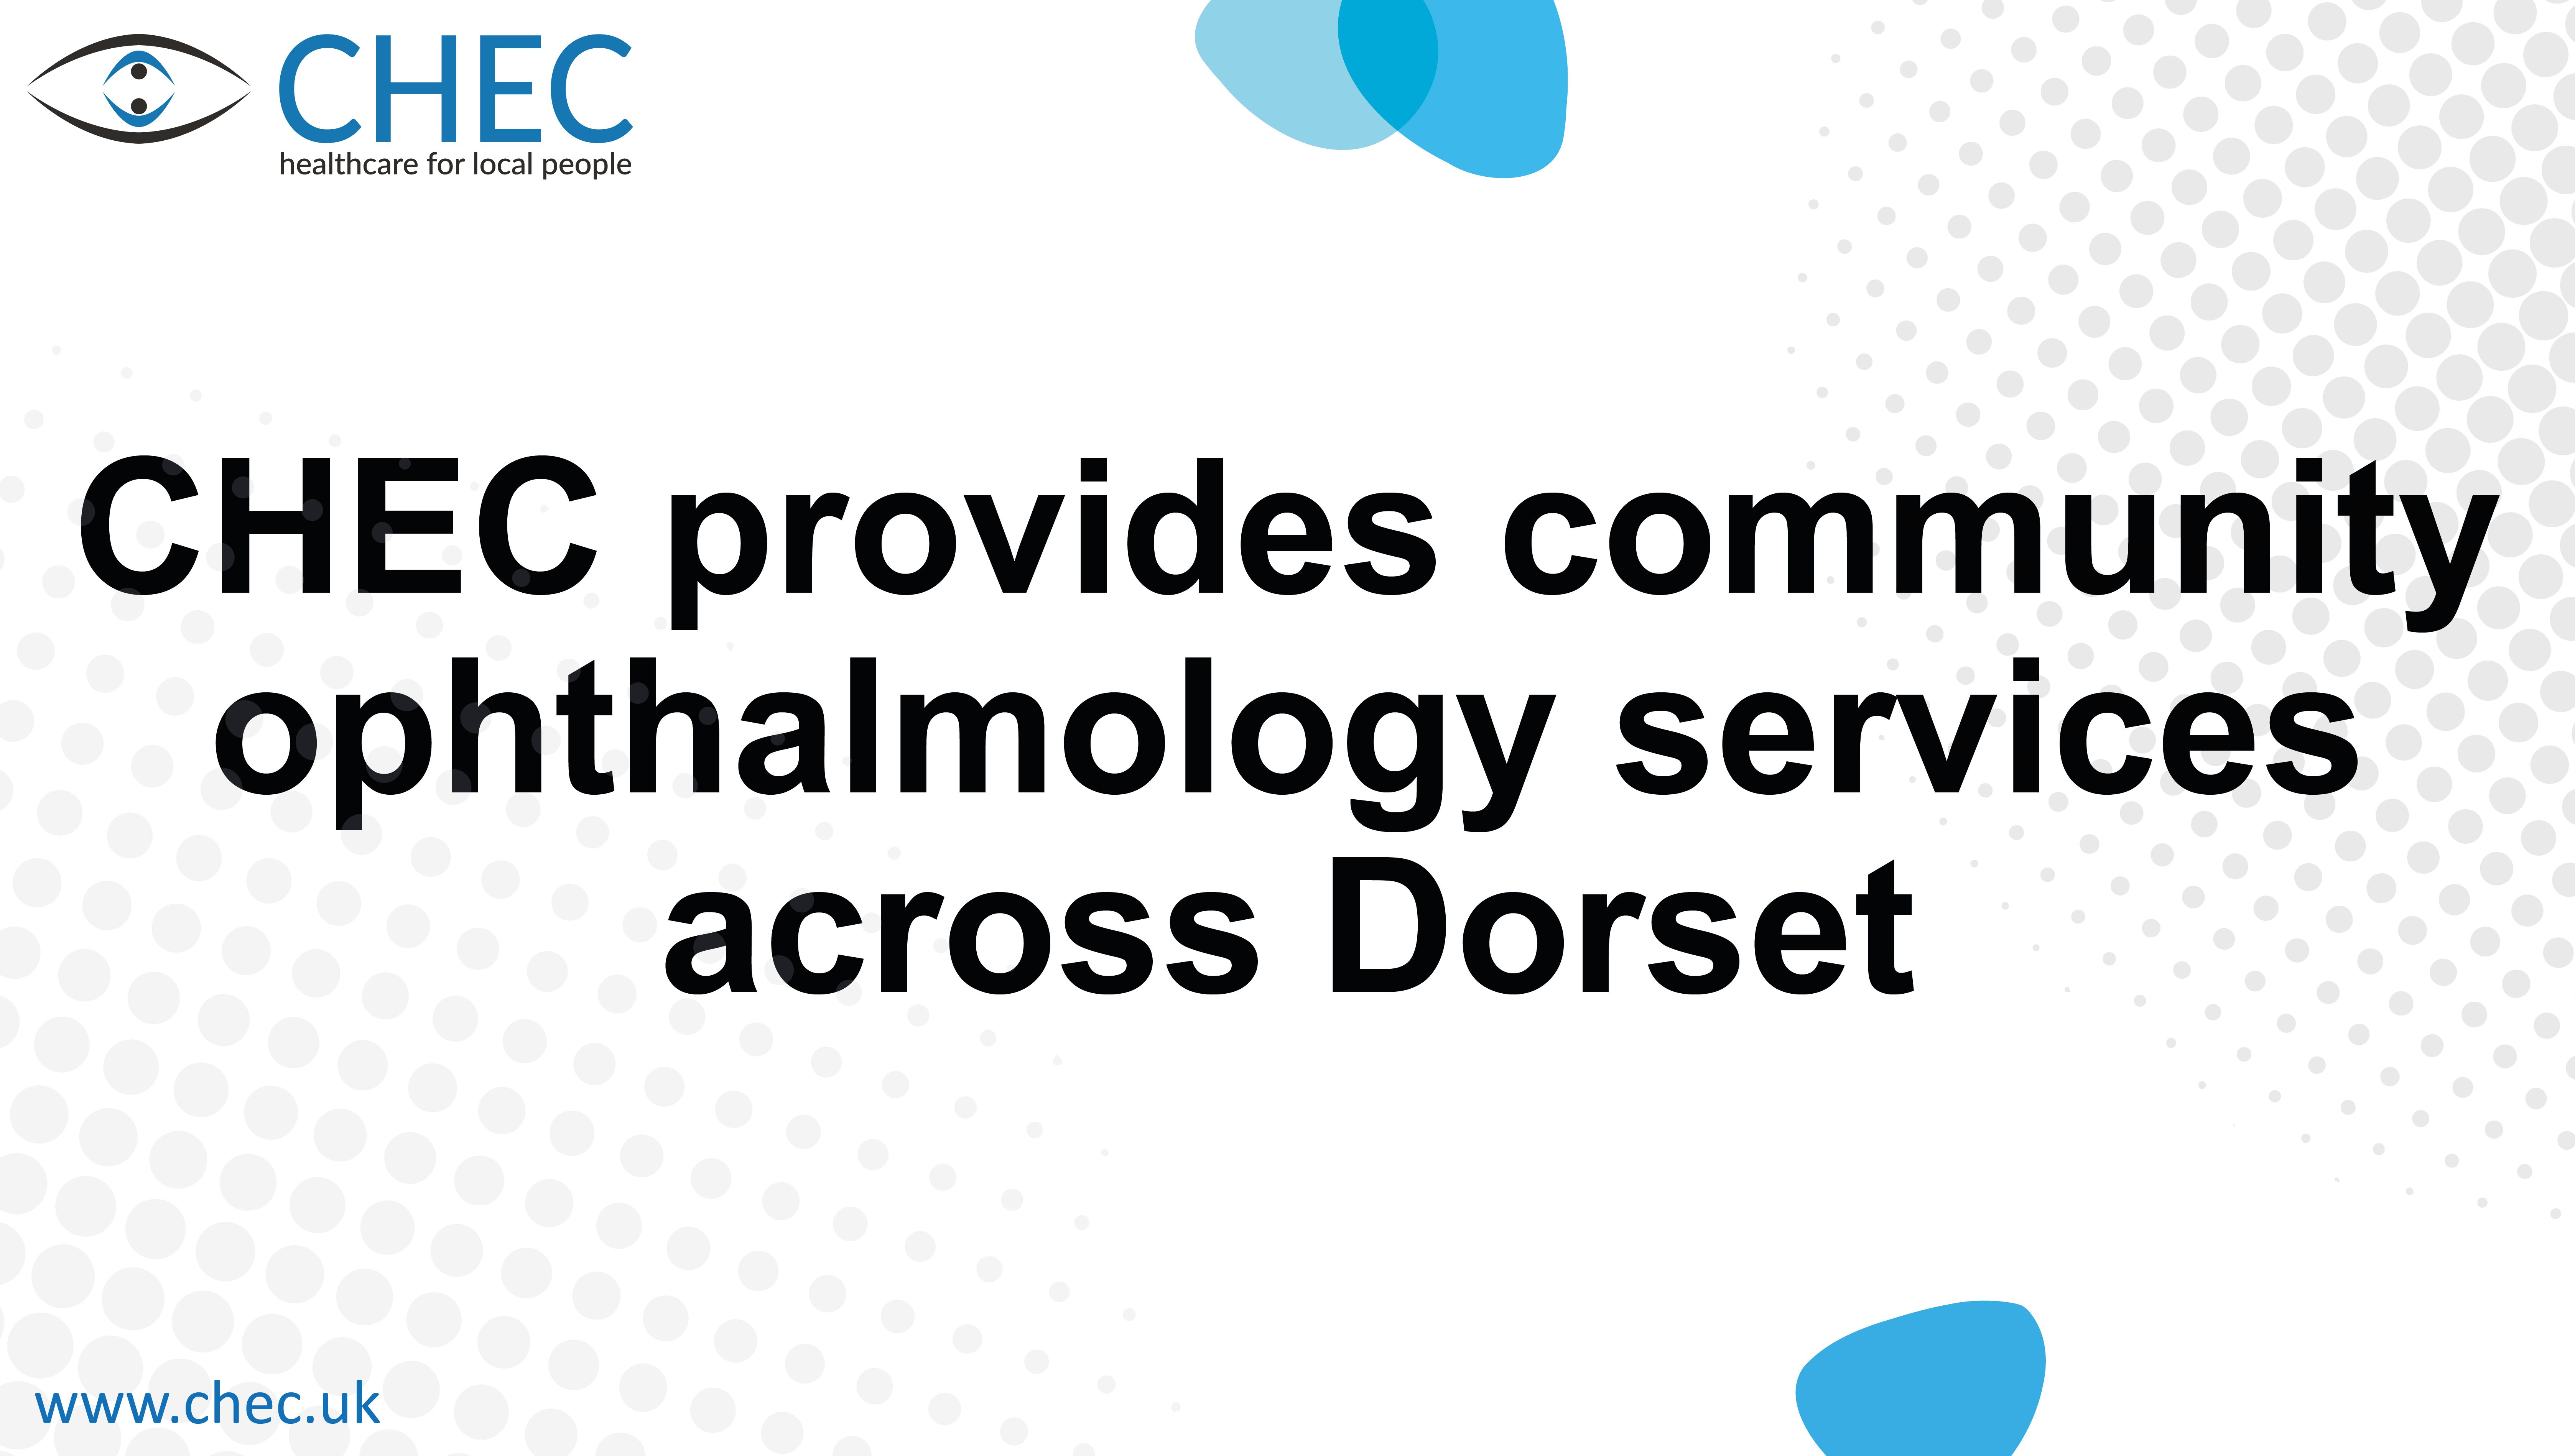 CHEC secures community ophthalmology services across Dorset